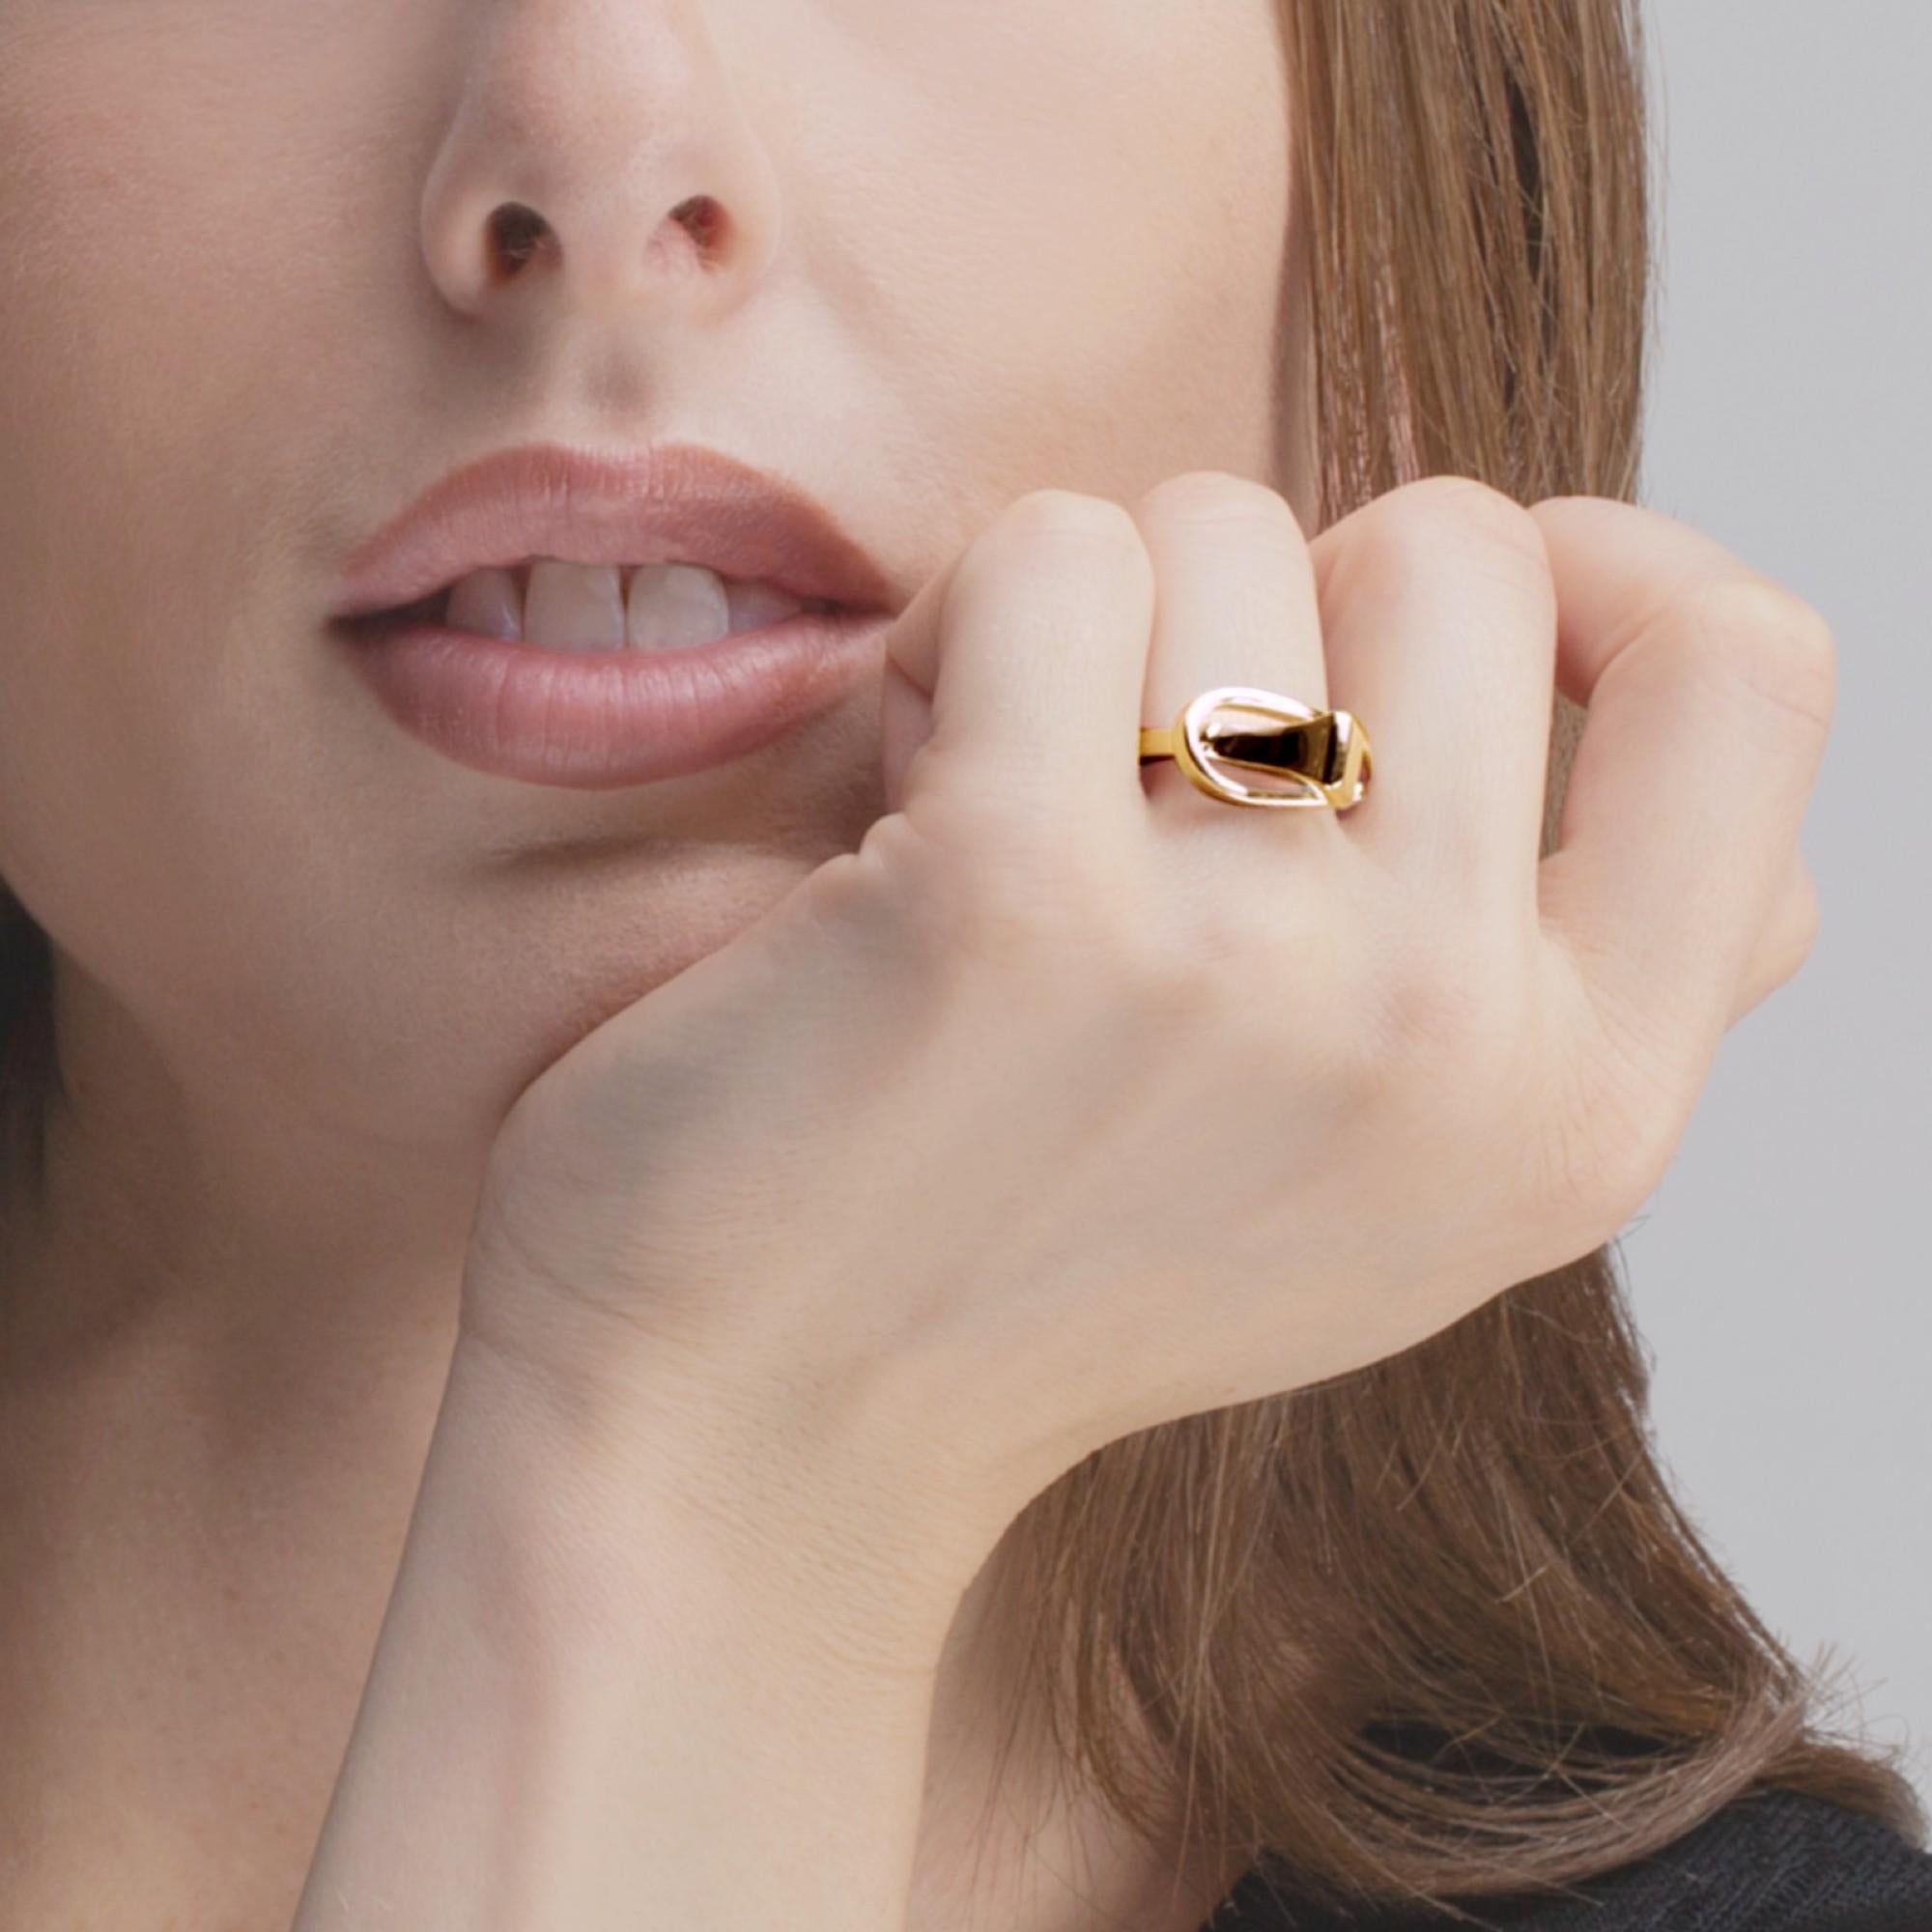 Alex Jona design collection, hand crafted in Italy, 18 Karat Yellow gold horse nail ring.
Alex Jona jewels stand out, not only for their special design and for the excellent quality of the gemstones, but also for the careful attention given to